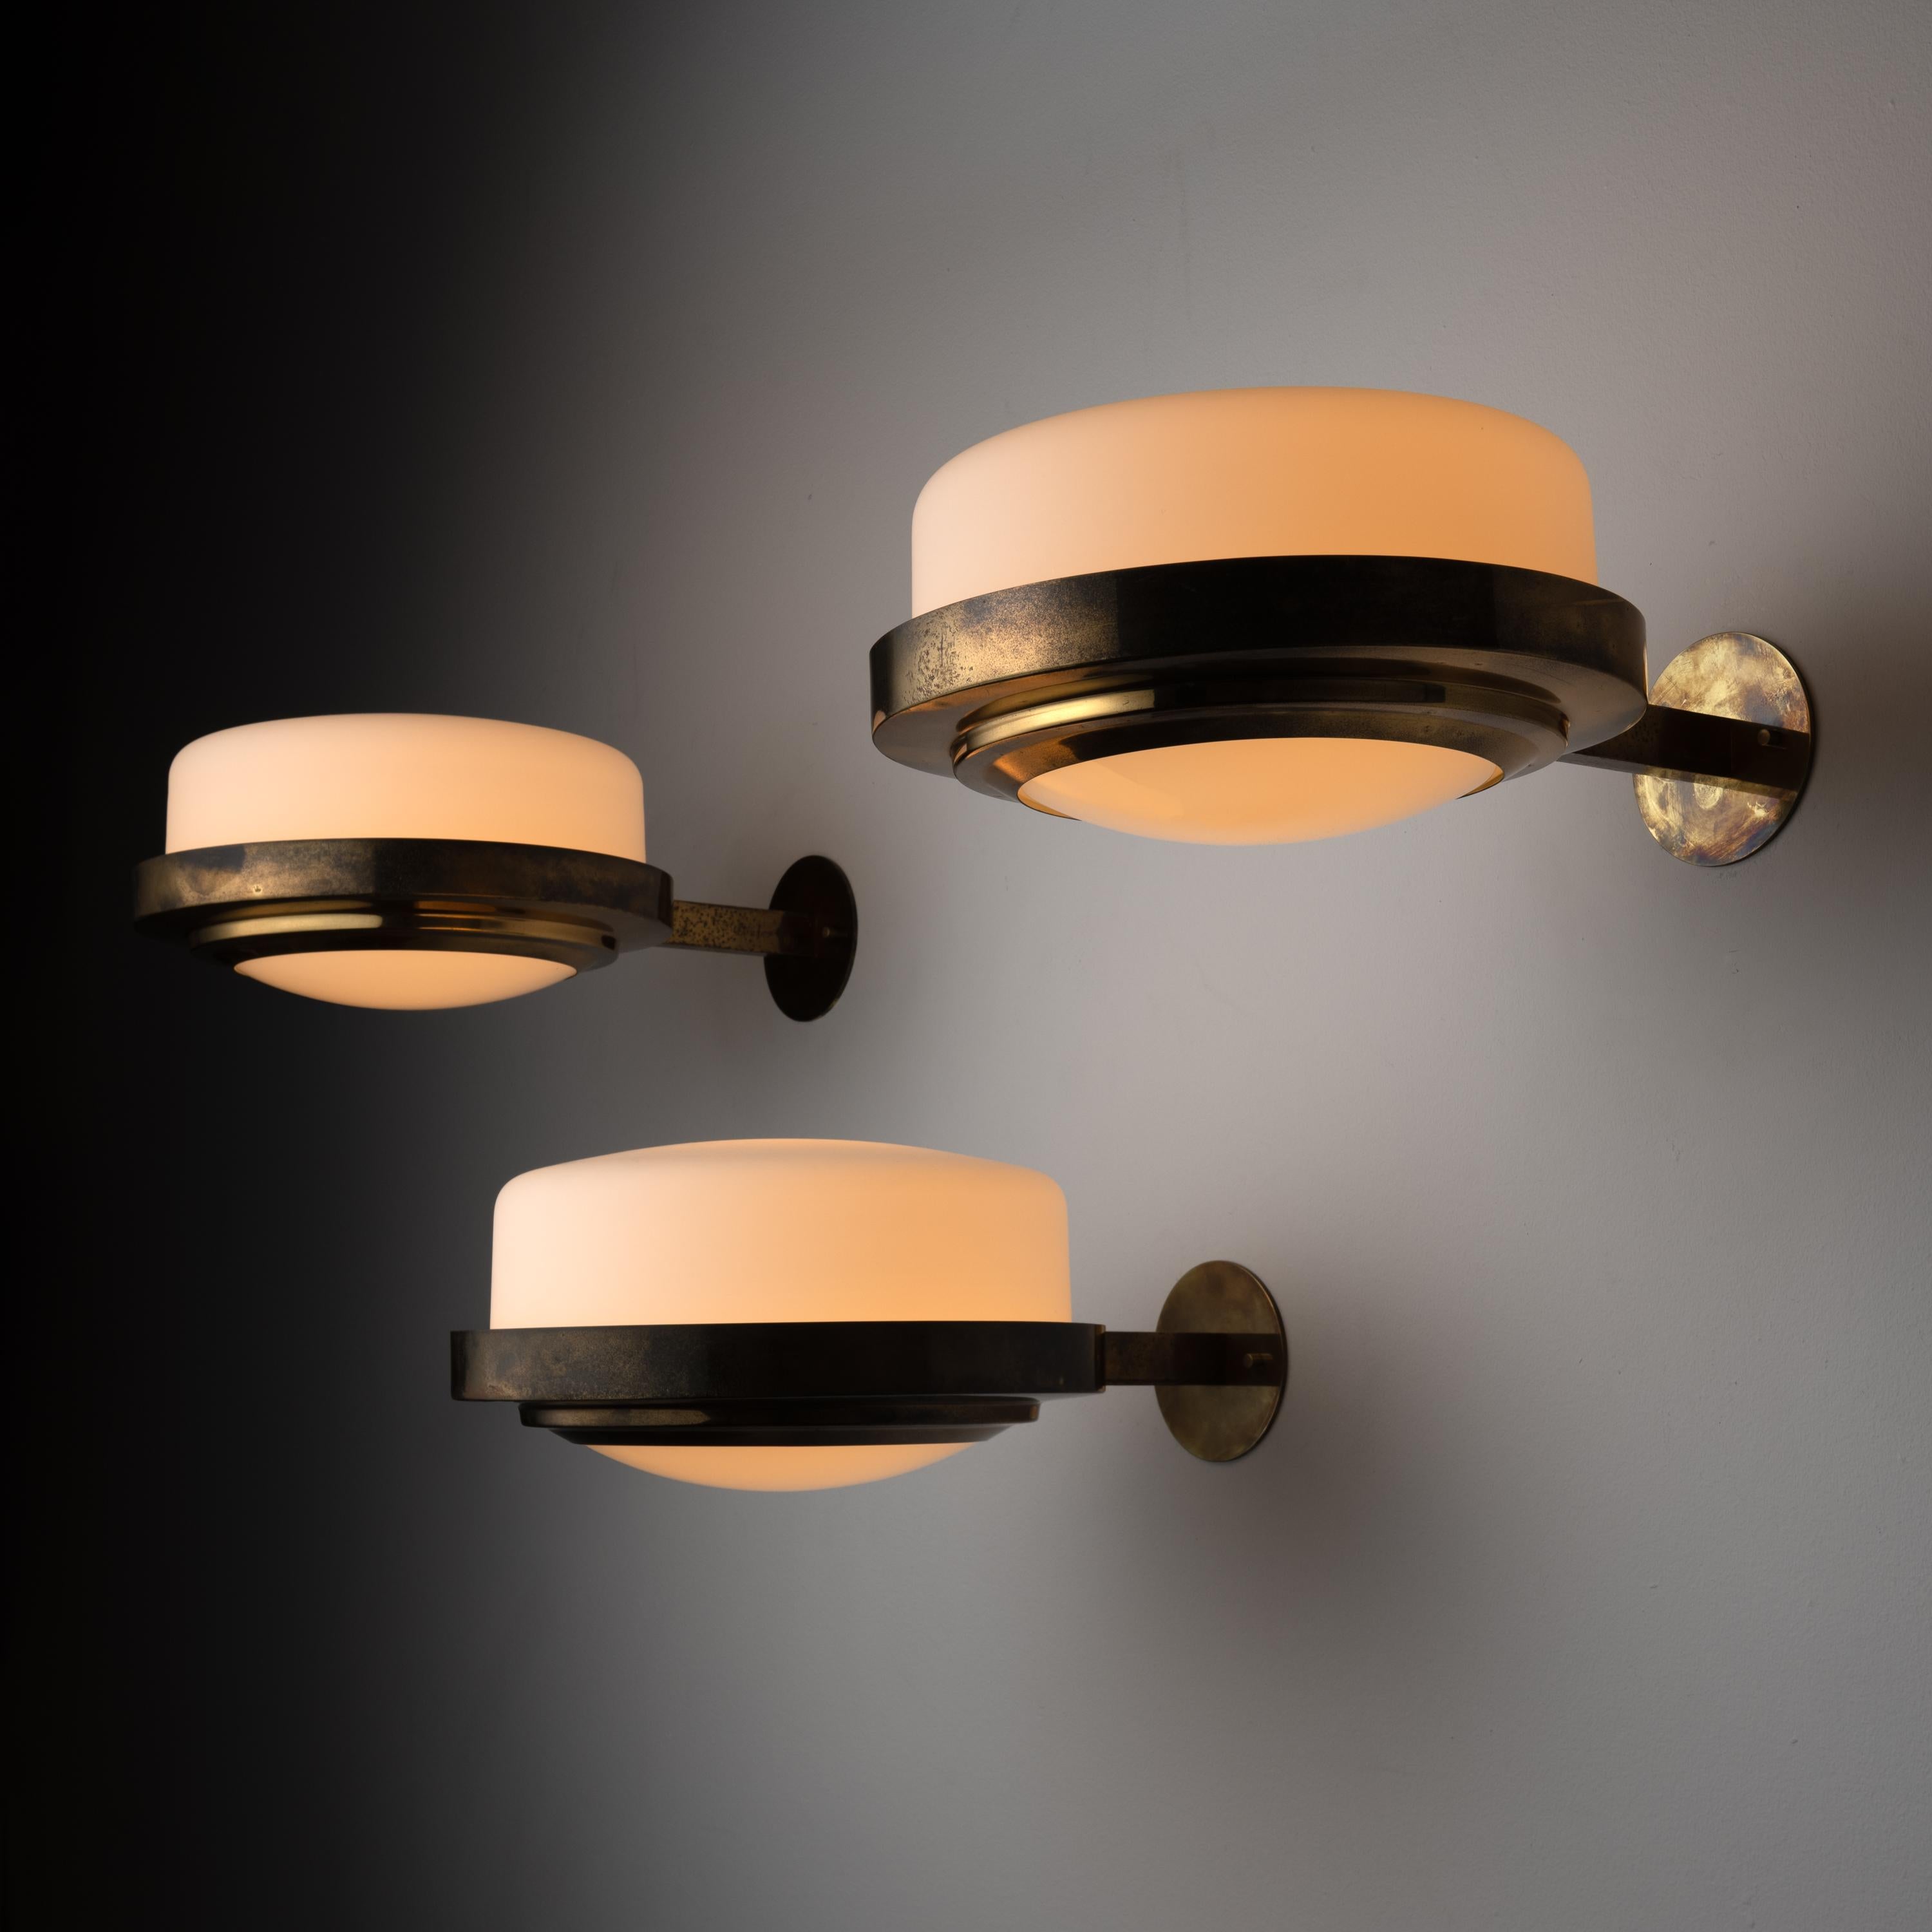 Rare sconces by Stilnovo. Designed and manufactured in Italy, circa 1960. These sconces contain a flush brass wall mount that is connected to a circular horizontal holder that carries a top frosted opaline glass shade, with a supporting opaline